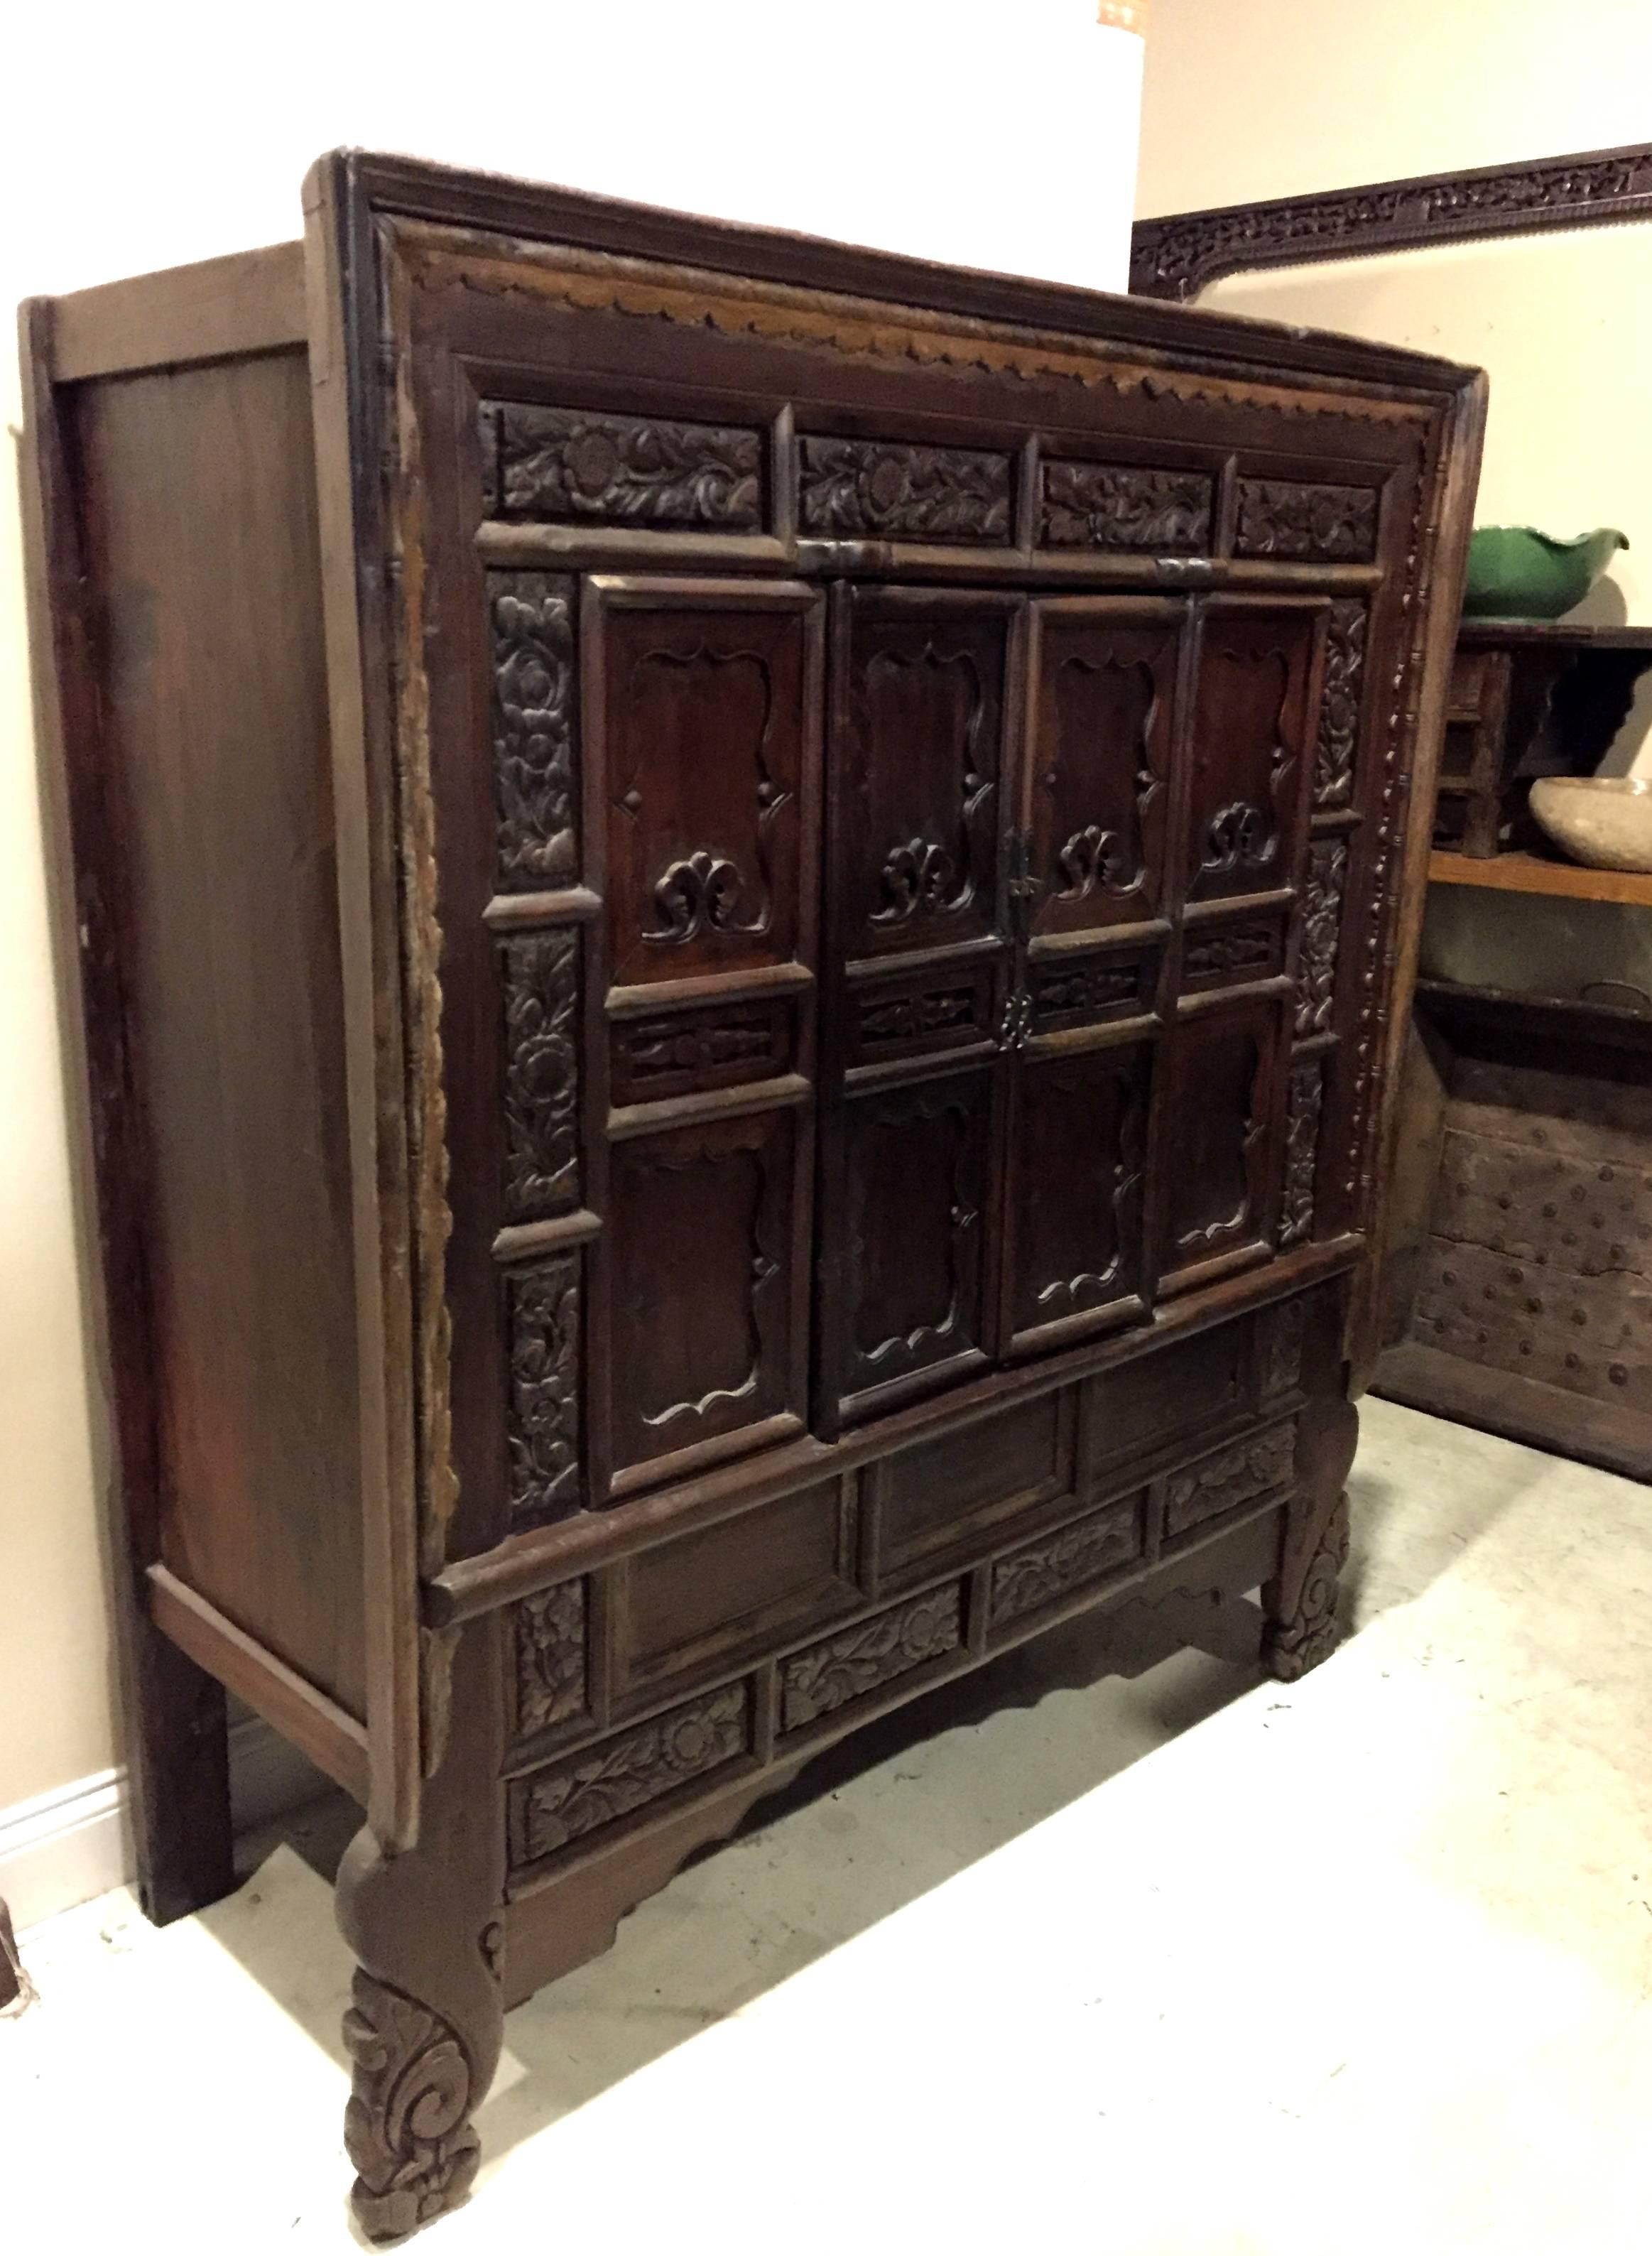 This massive cabinet is from Shanxi province, China's ancient frontier and trade post. Commanding at over 5' wide with solid structure and bold features, this exceptional piece demonstrates all the trademarks of northern Chinese furniture. The front